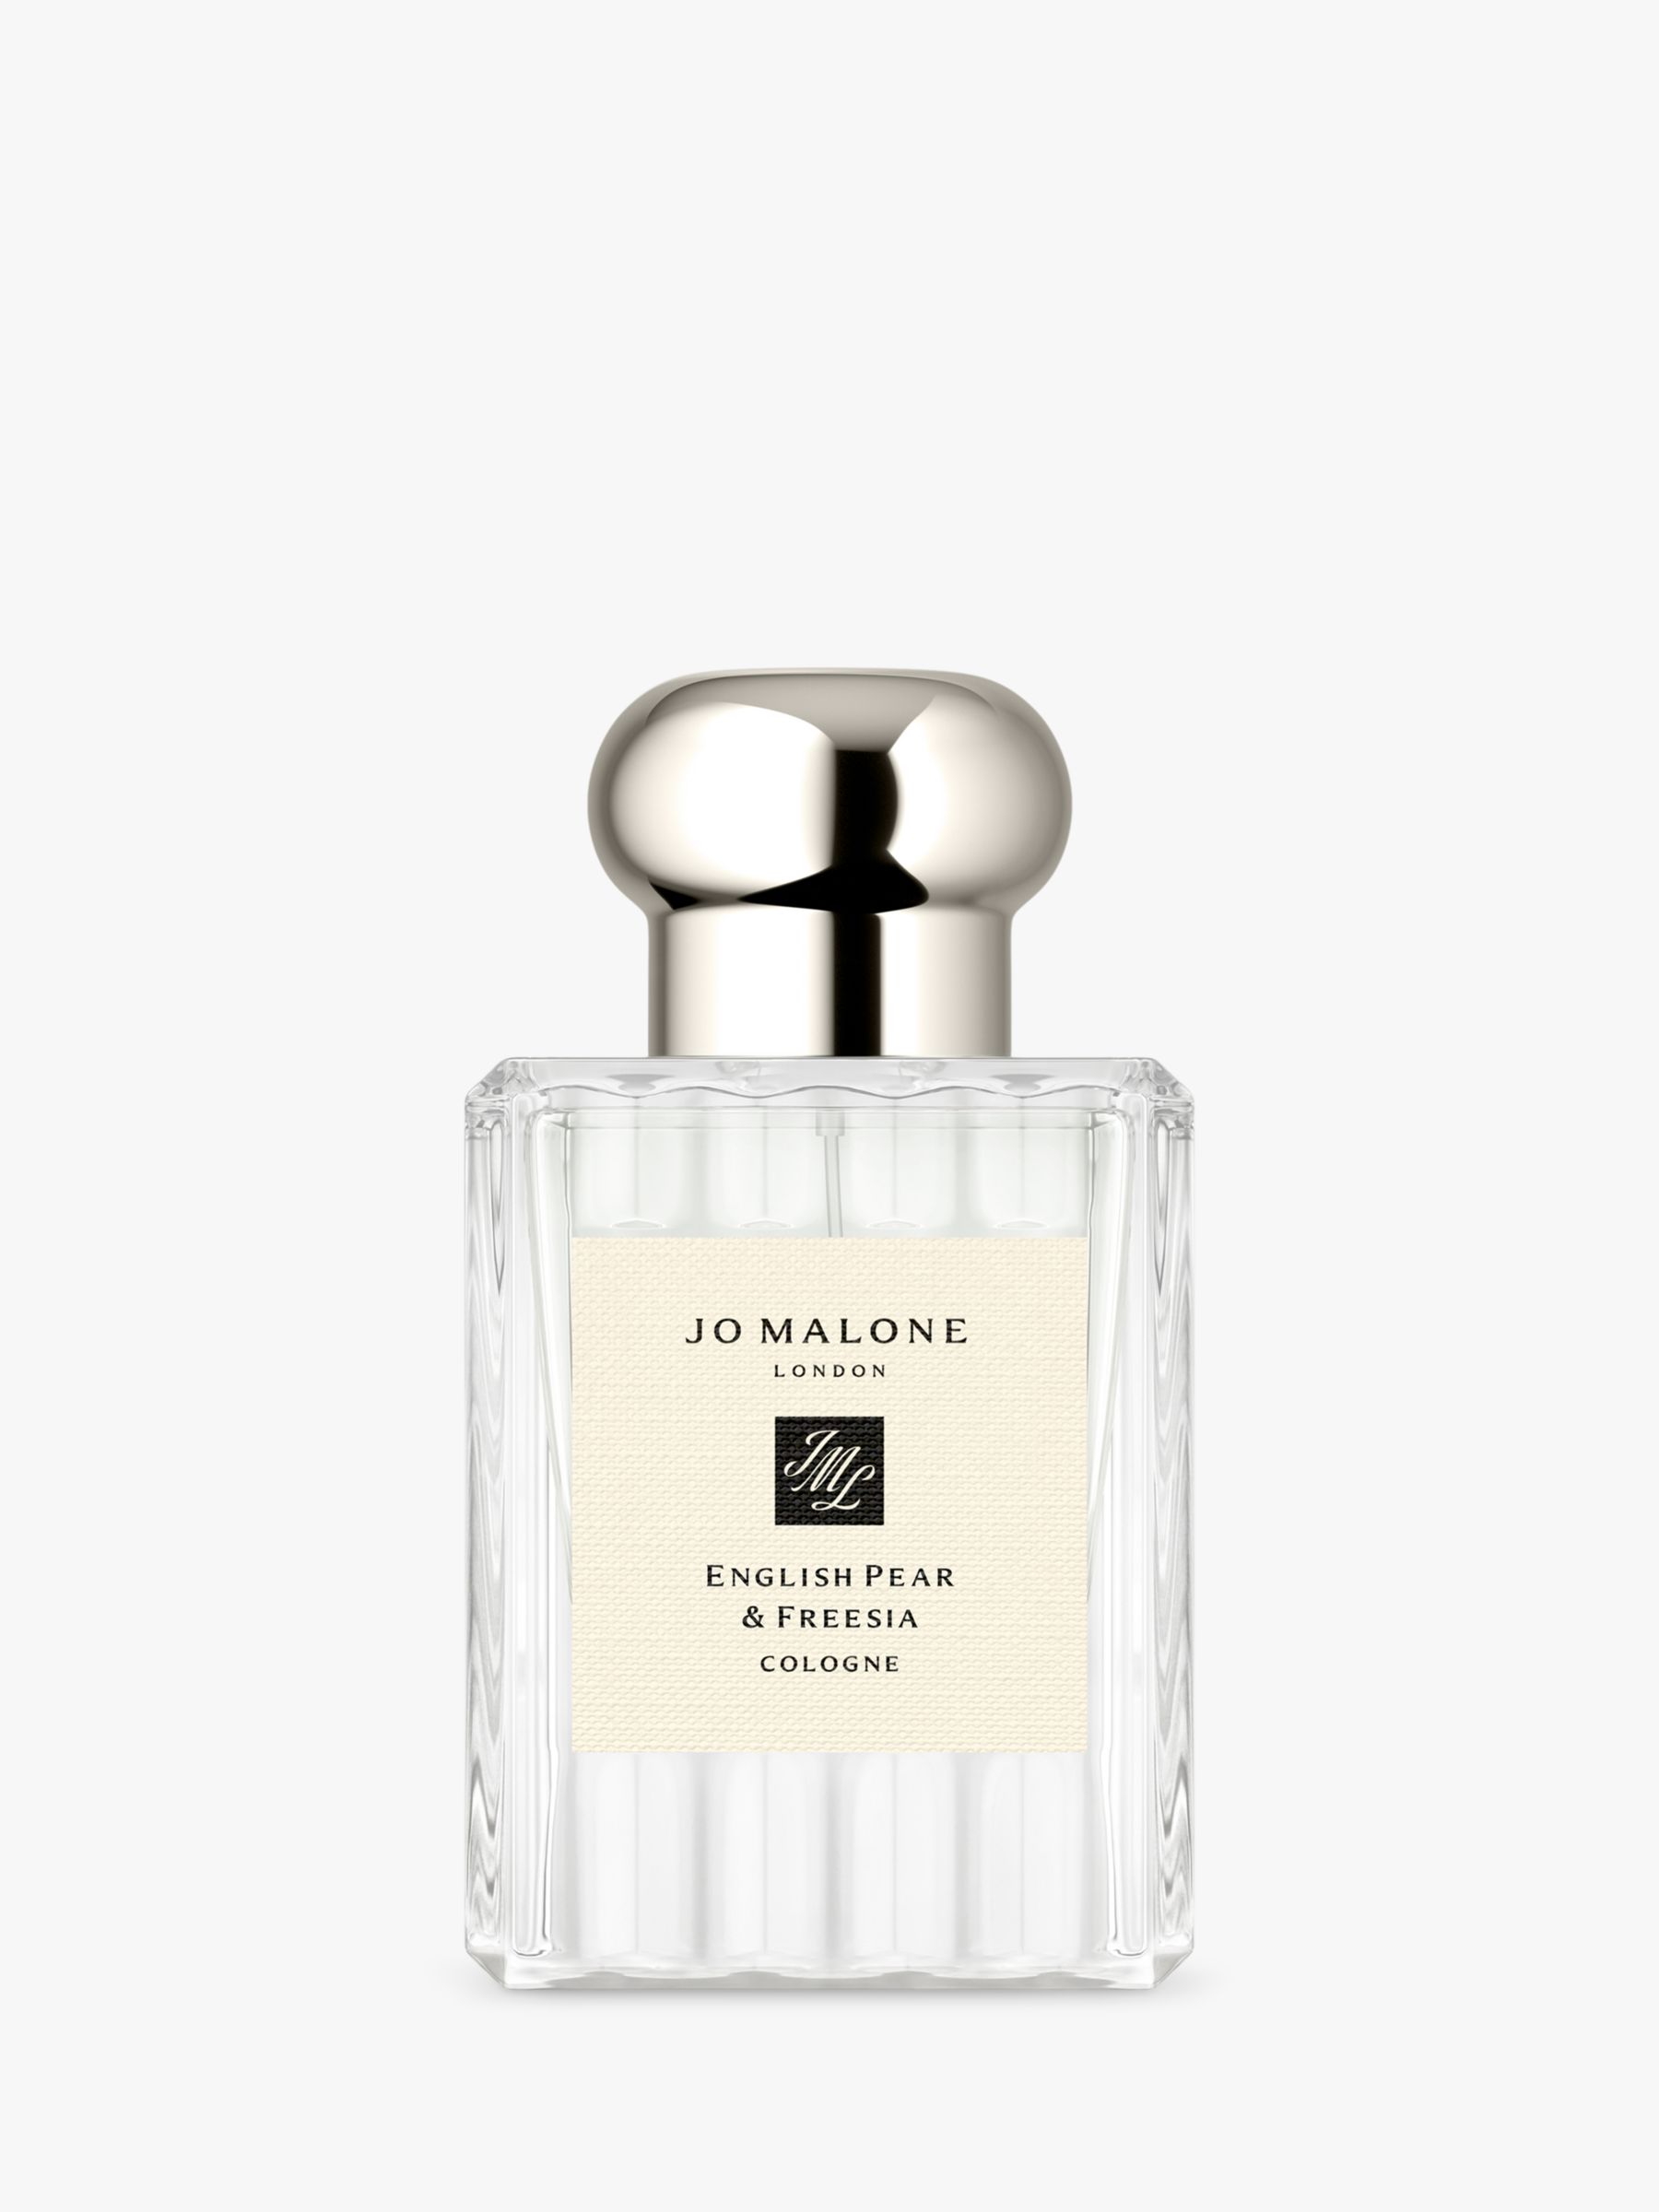 Jo Malone London English Pear & Freesia Cologne Fluted Special Edition, 50ml 1